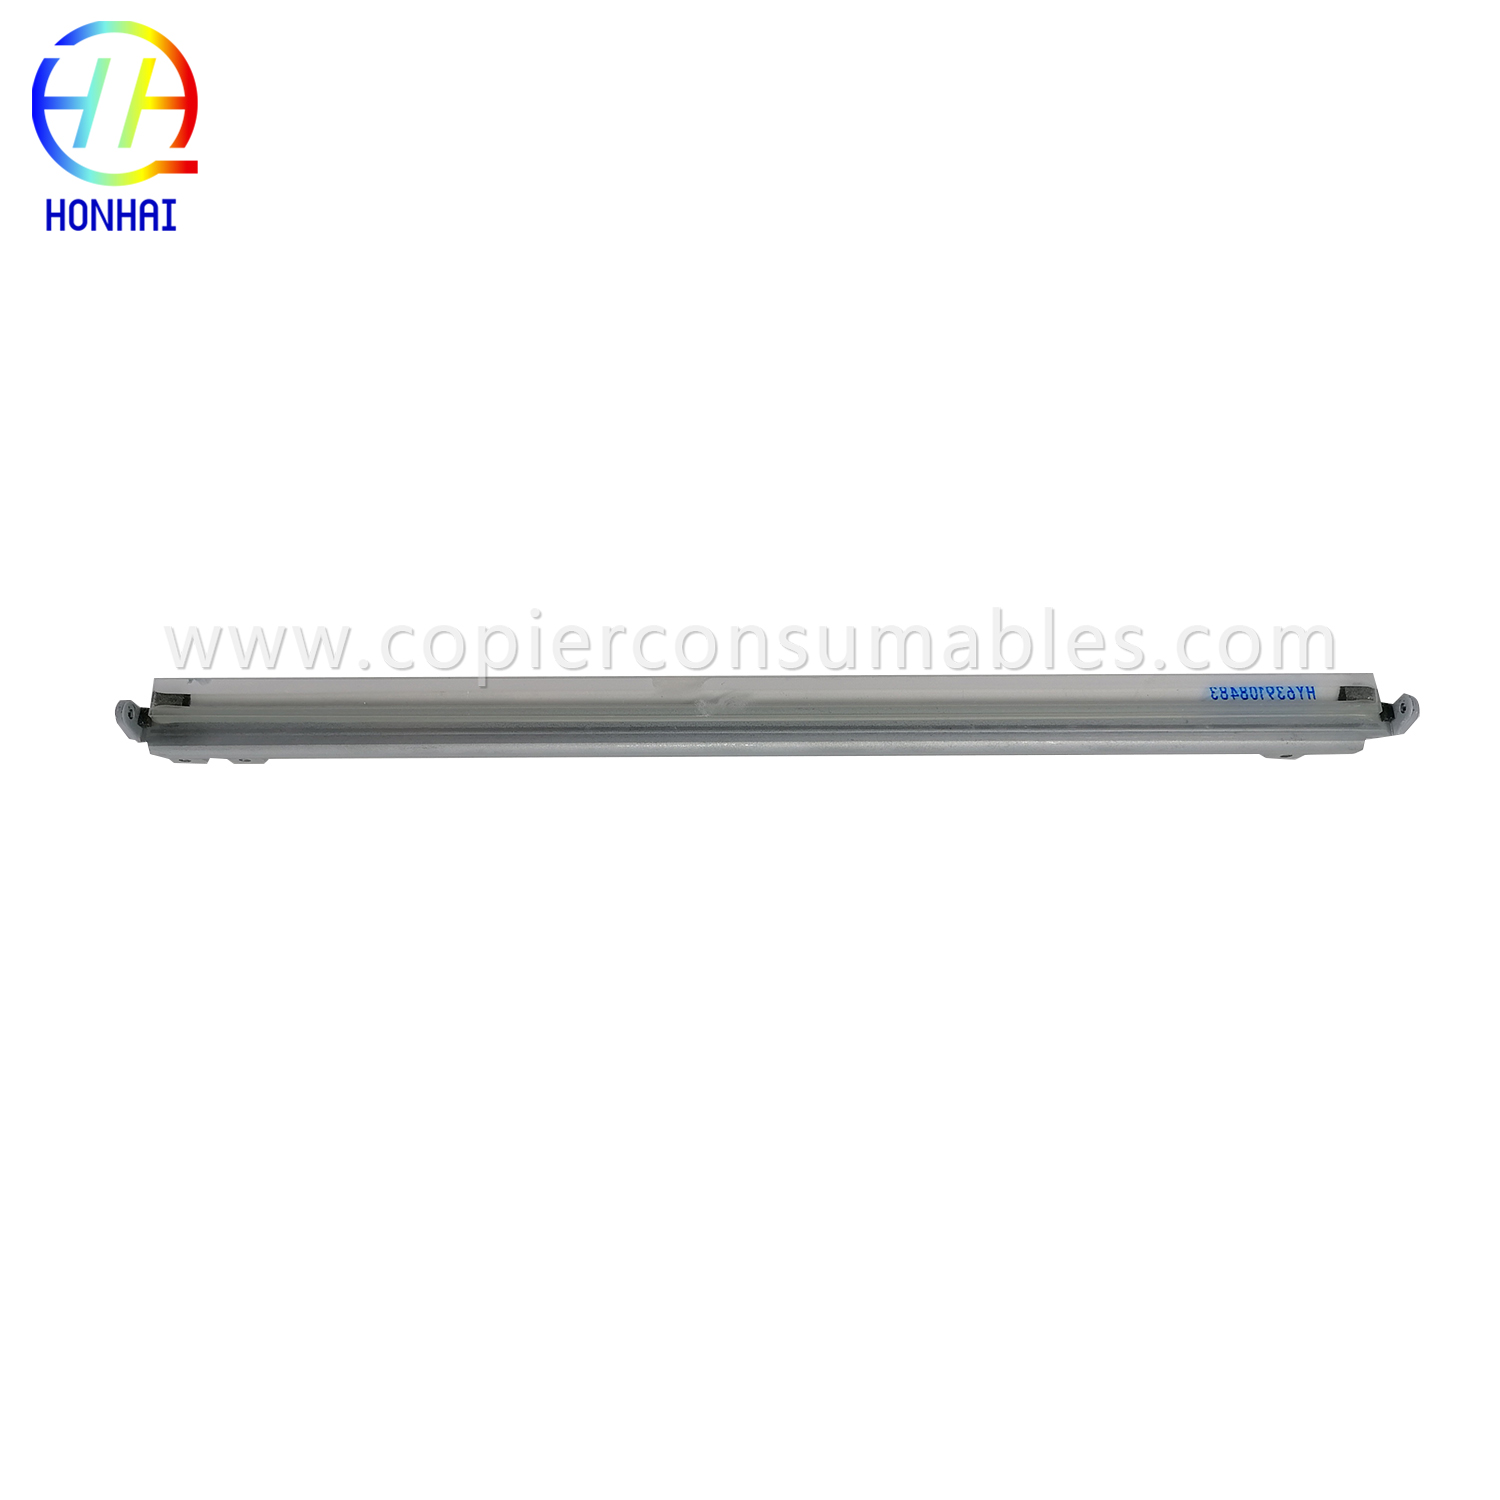 ITB Cleaning Blade for HP IRC 5225 750 M775 700